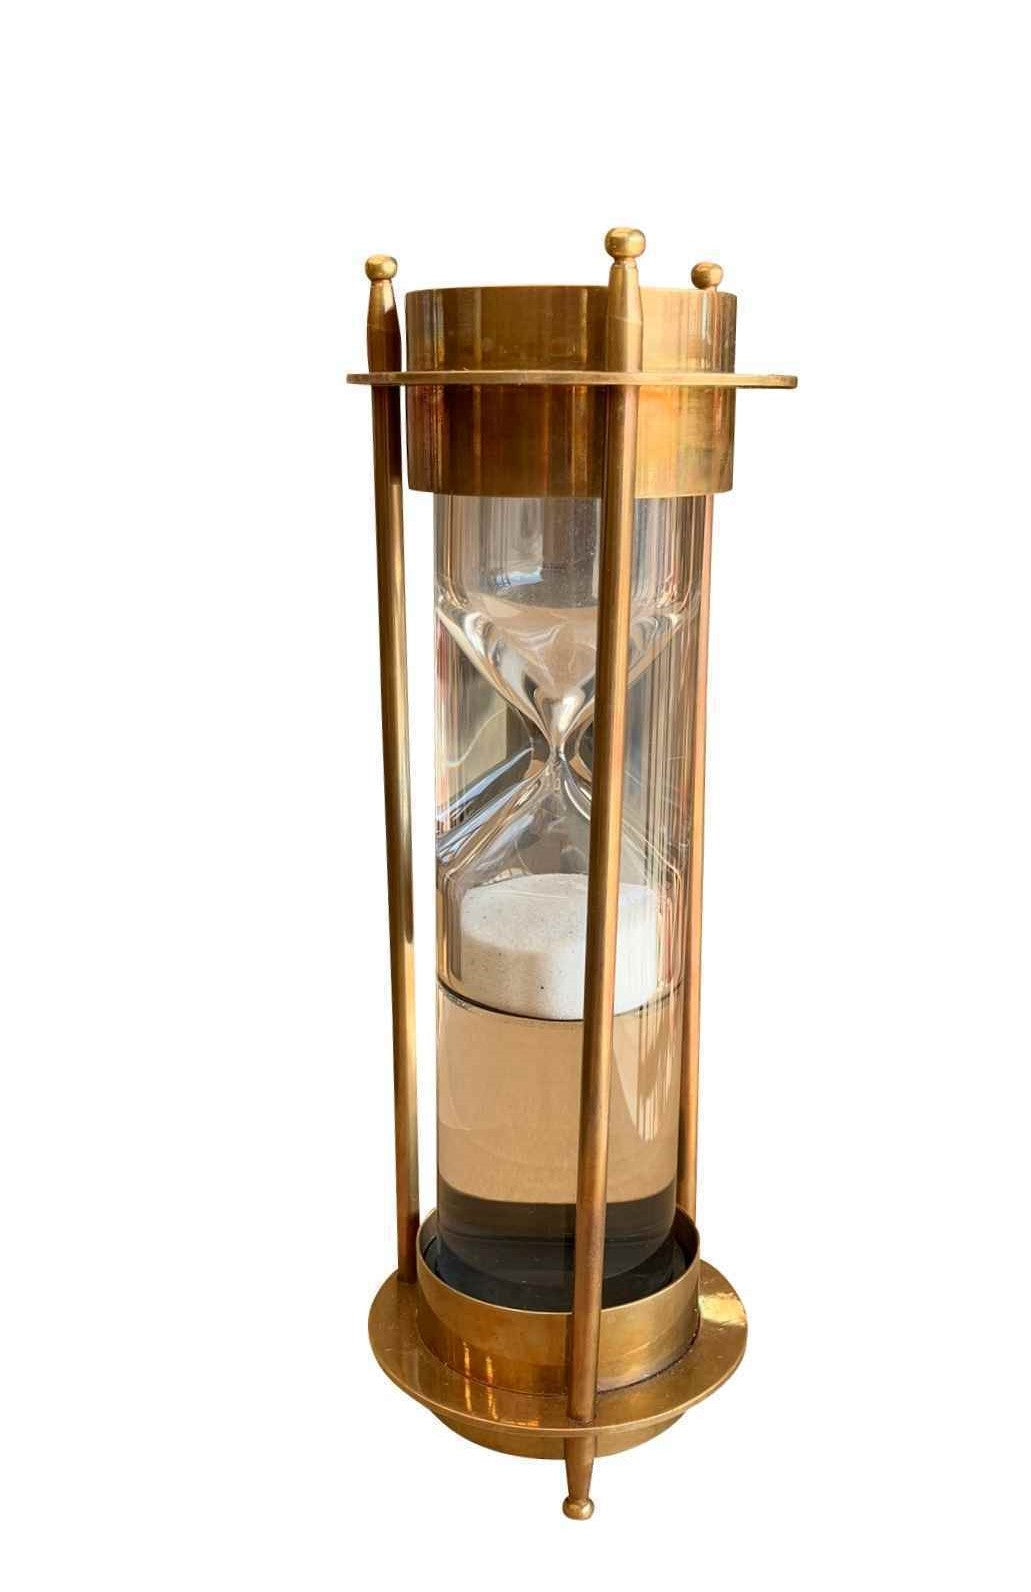 Upright hourglass sand timer finished in brass. Each end contains a compass.